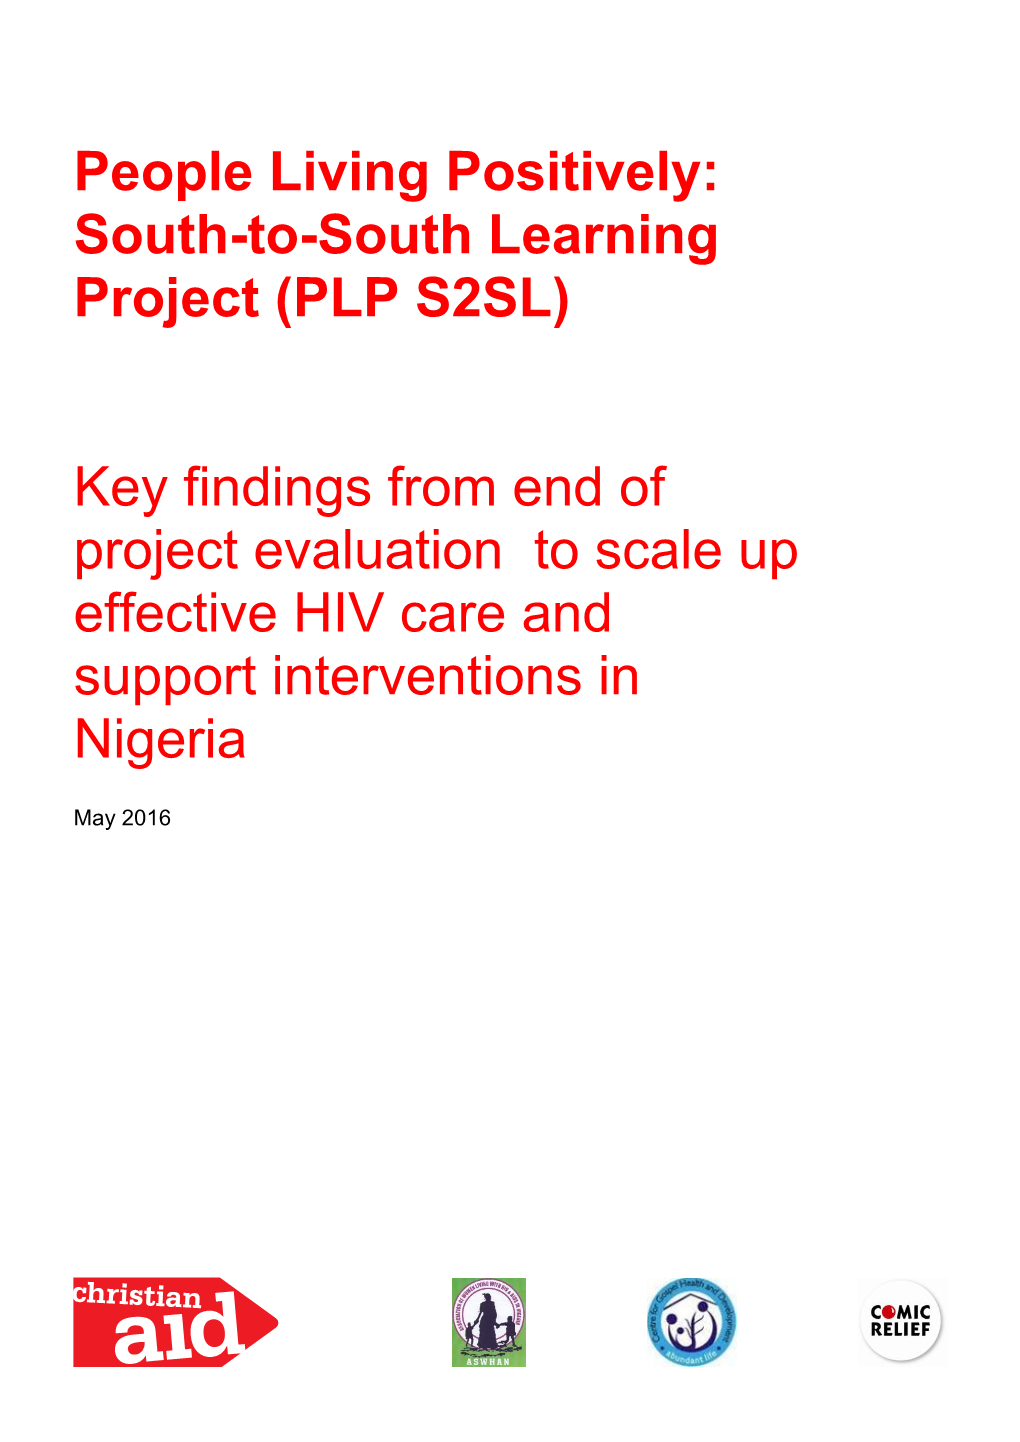 South-To-South Learning Project On